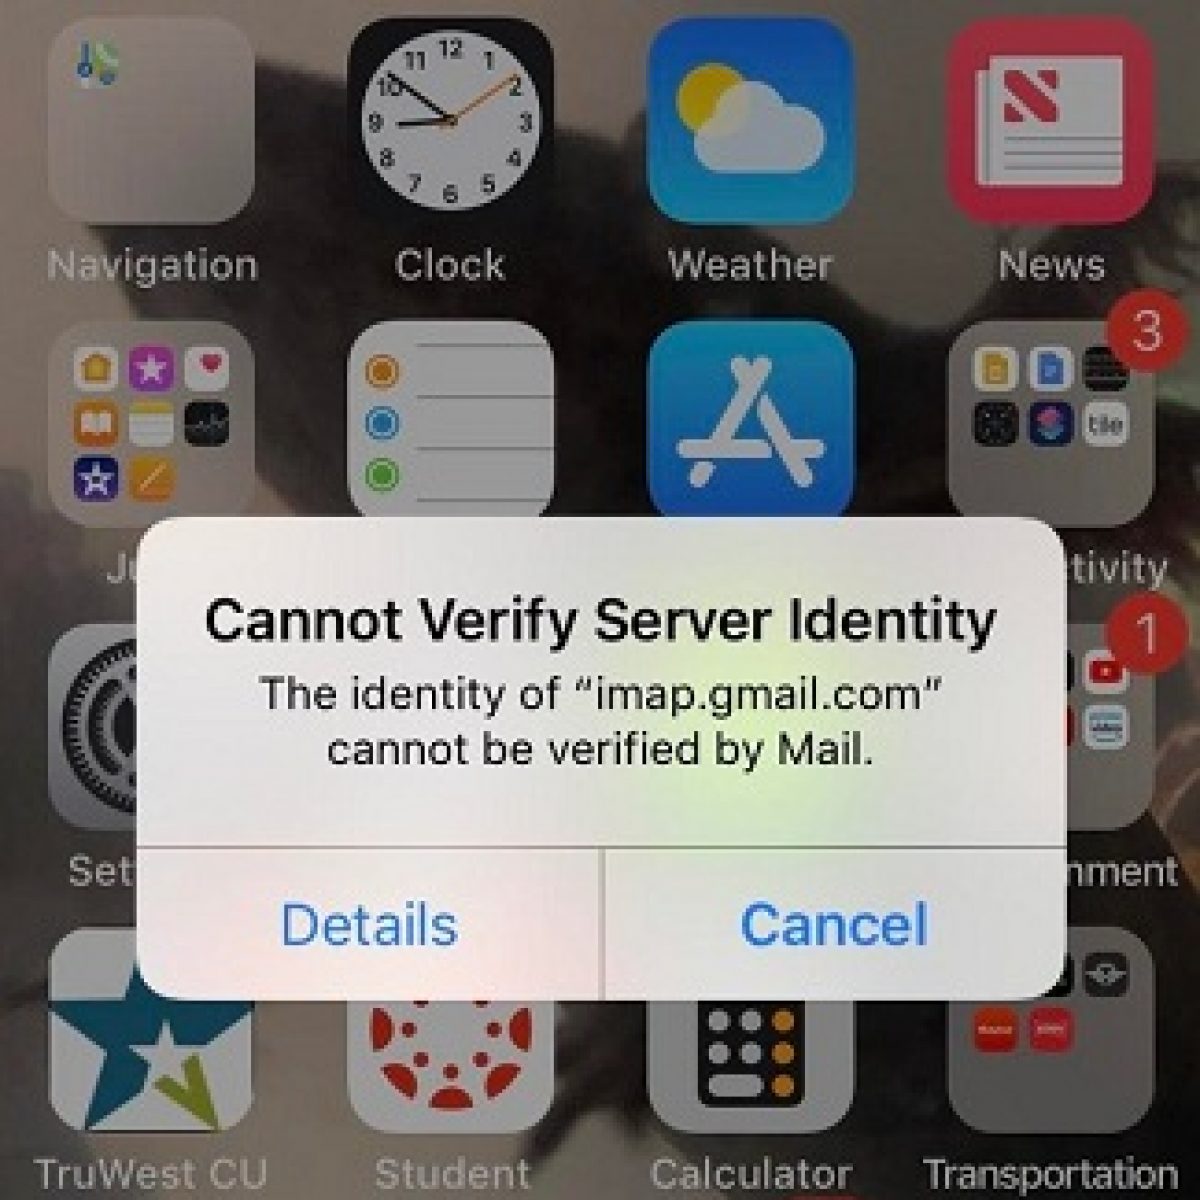 Why does it say my address Cannot be verified?